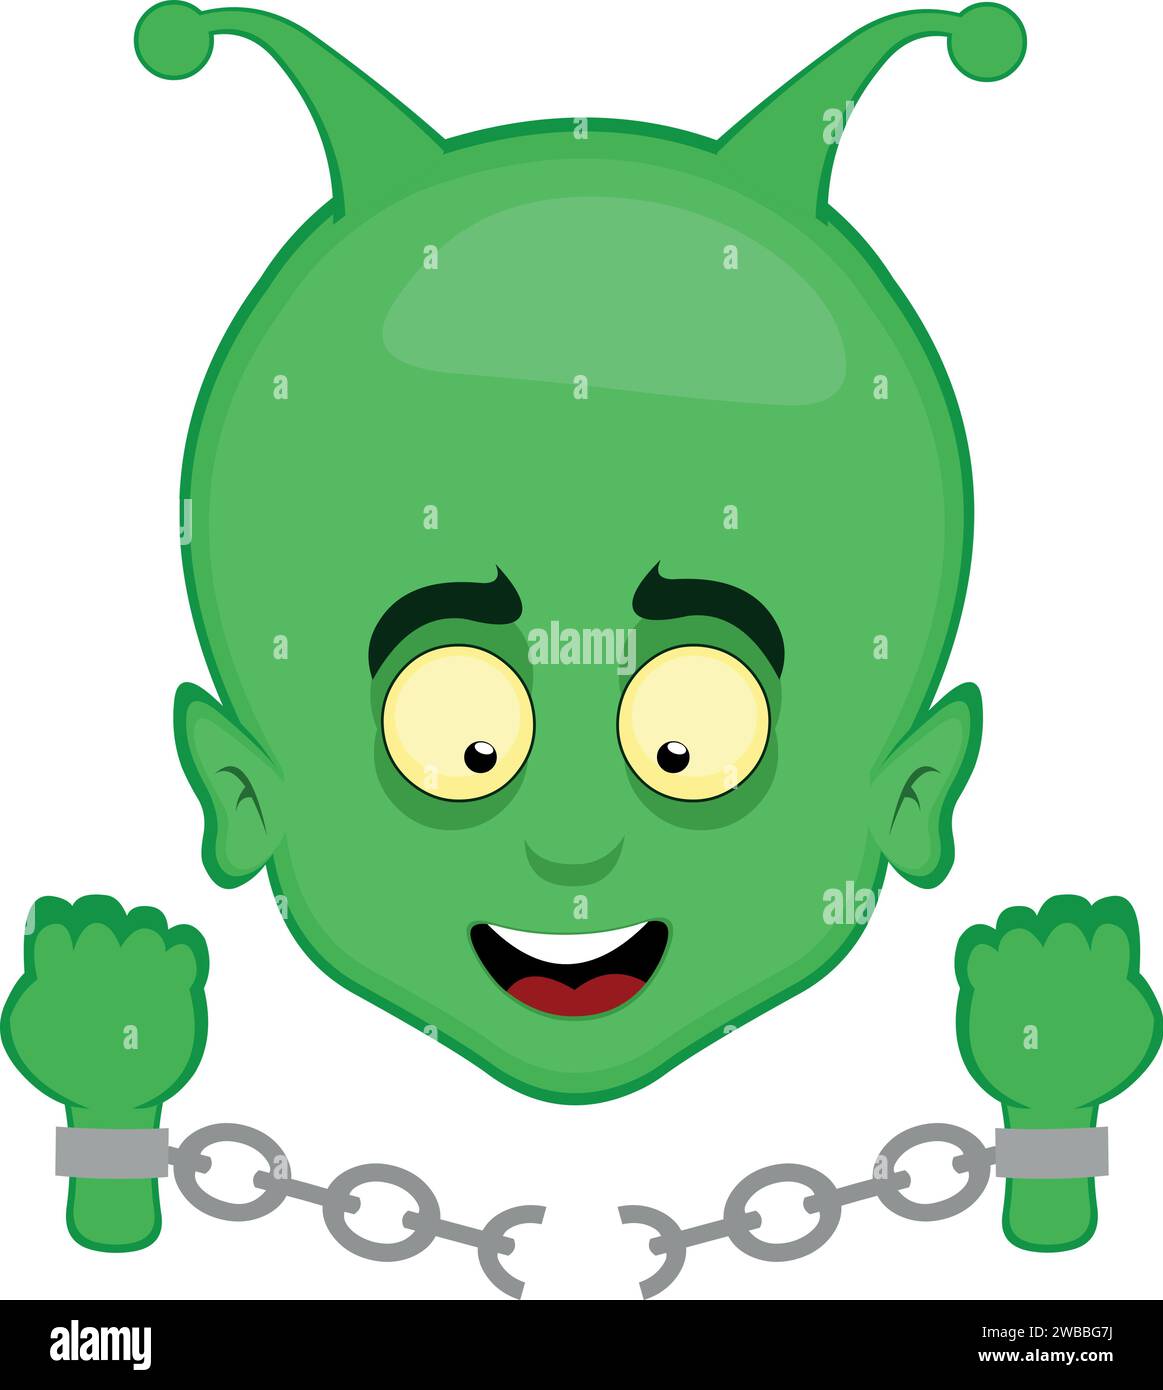 vector illustration face alien or extraterrestrial cartoon, breaking chains of the hands, in the concept of freedom Stock Vector